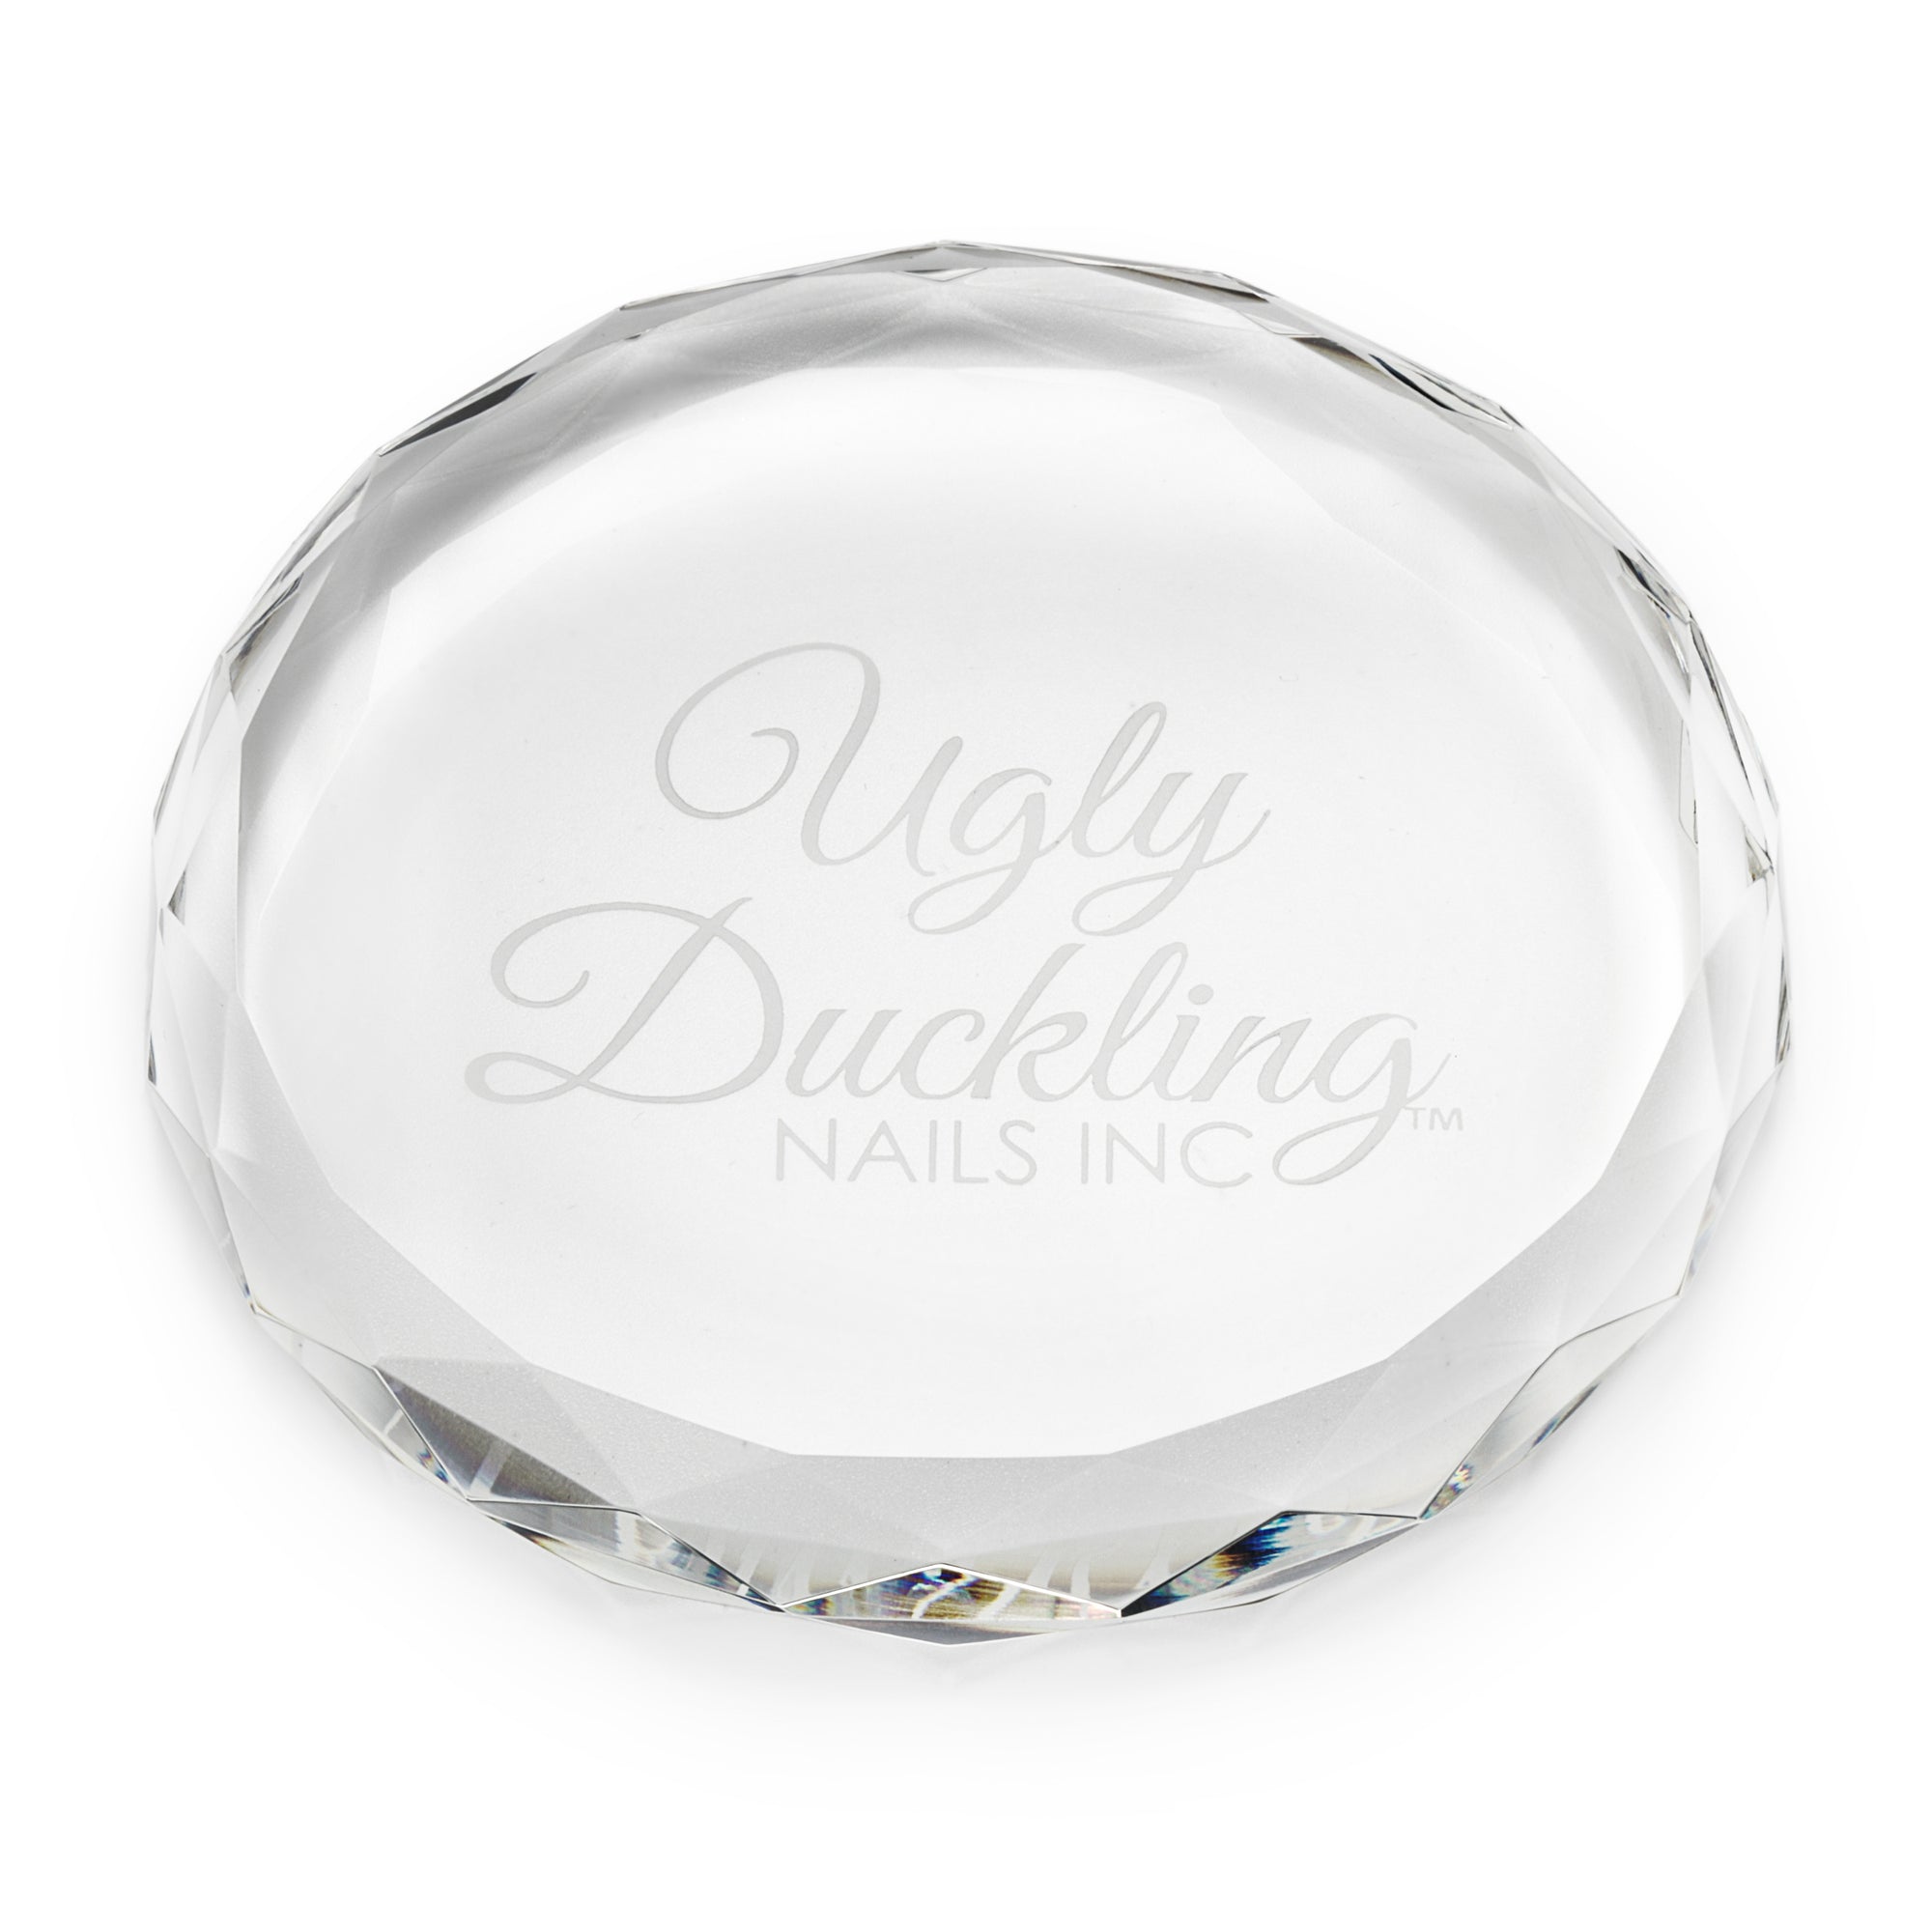 Ugly Duckling crystal palette